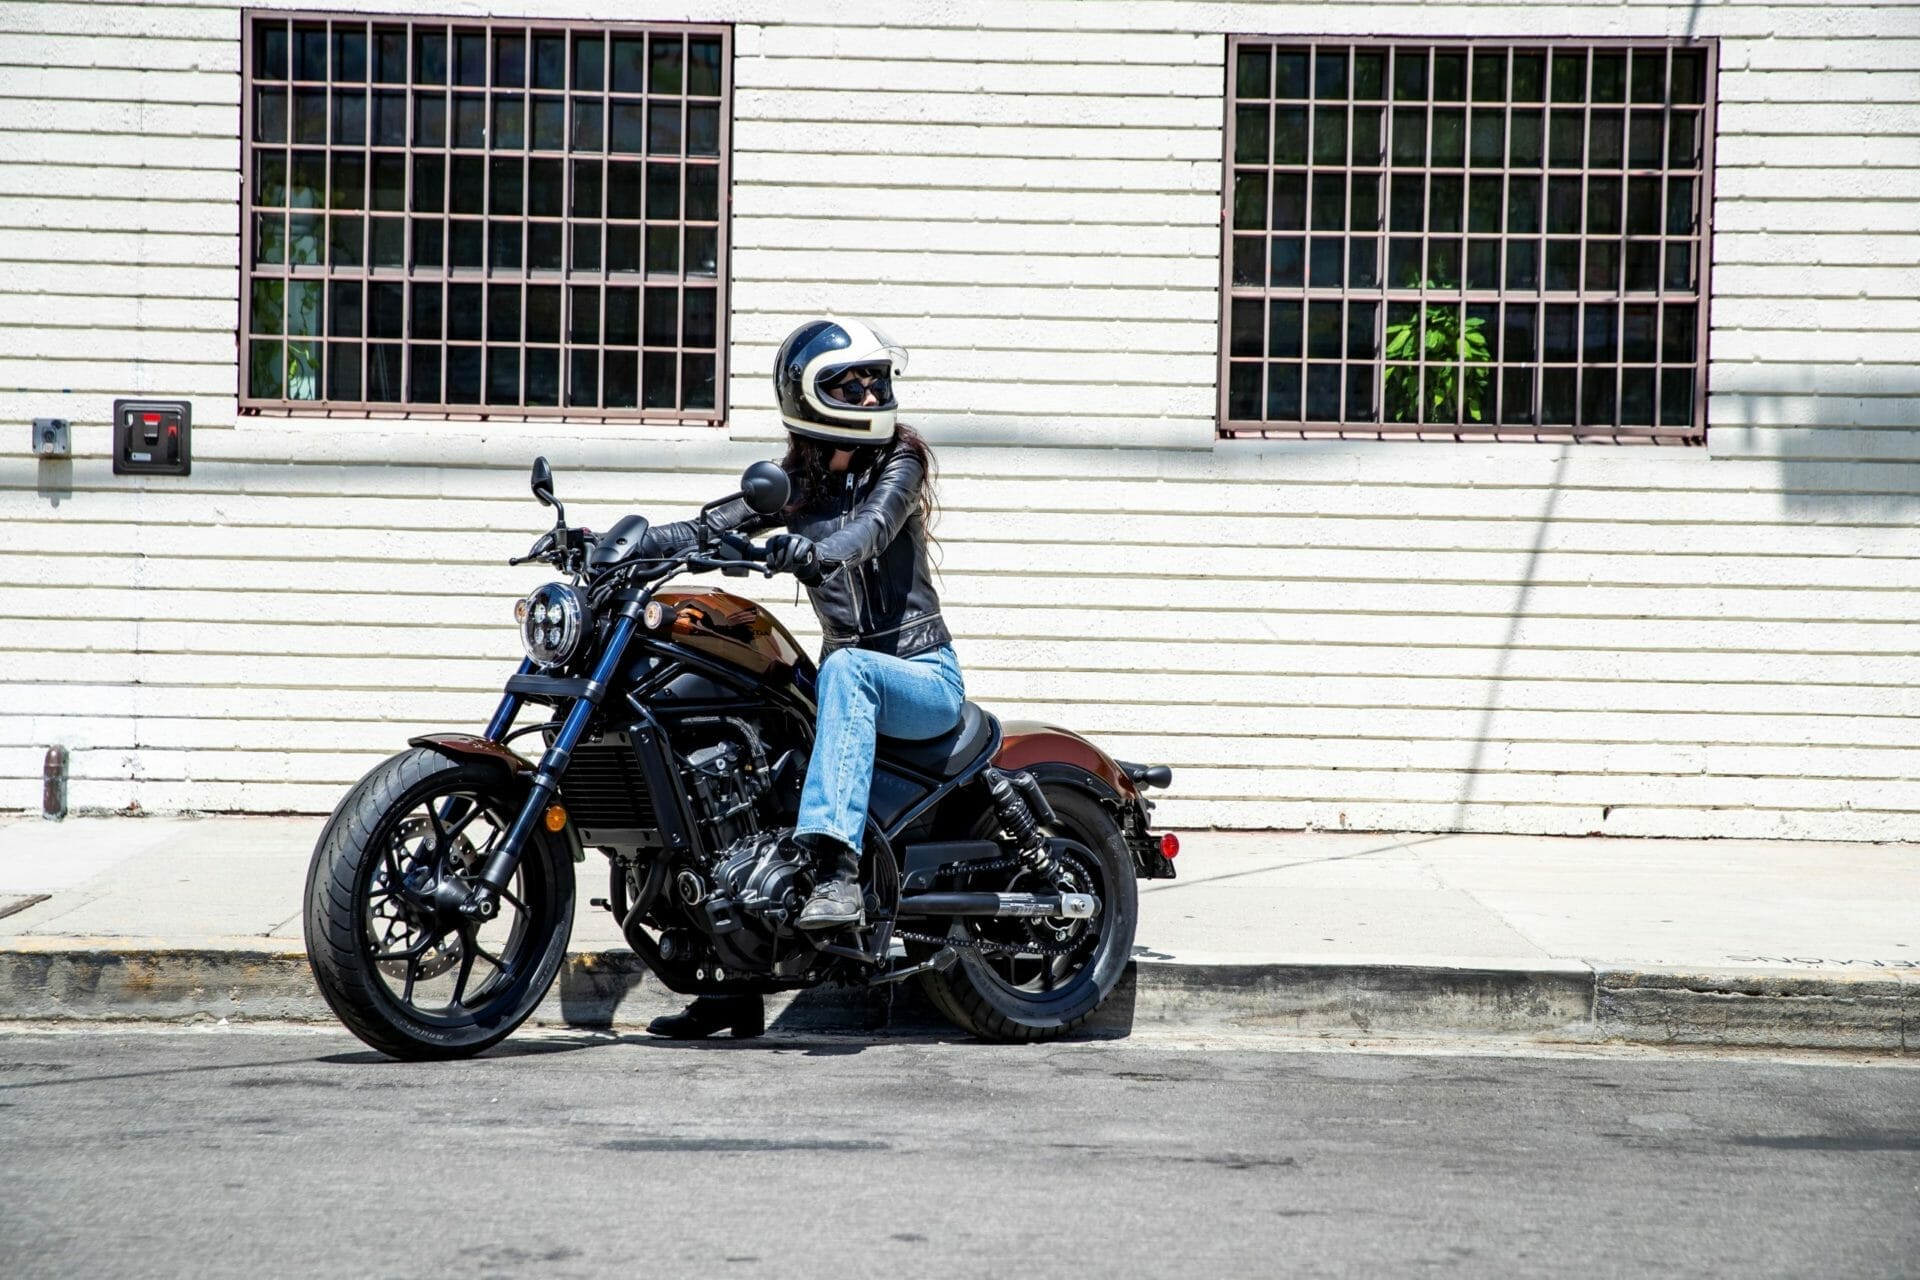 Honda Rebel in new color dress
- also in the MOTORCYCLES.NEWS APP